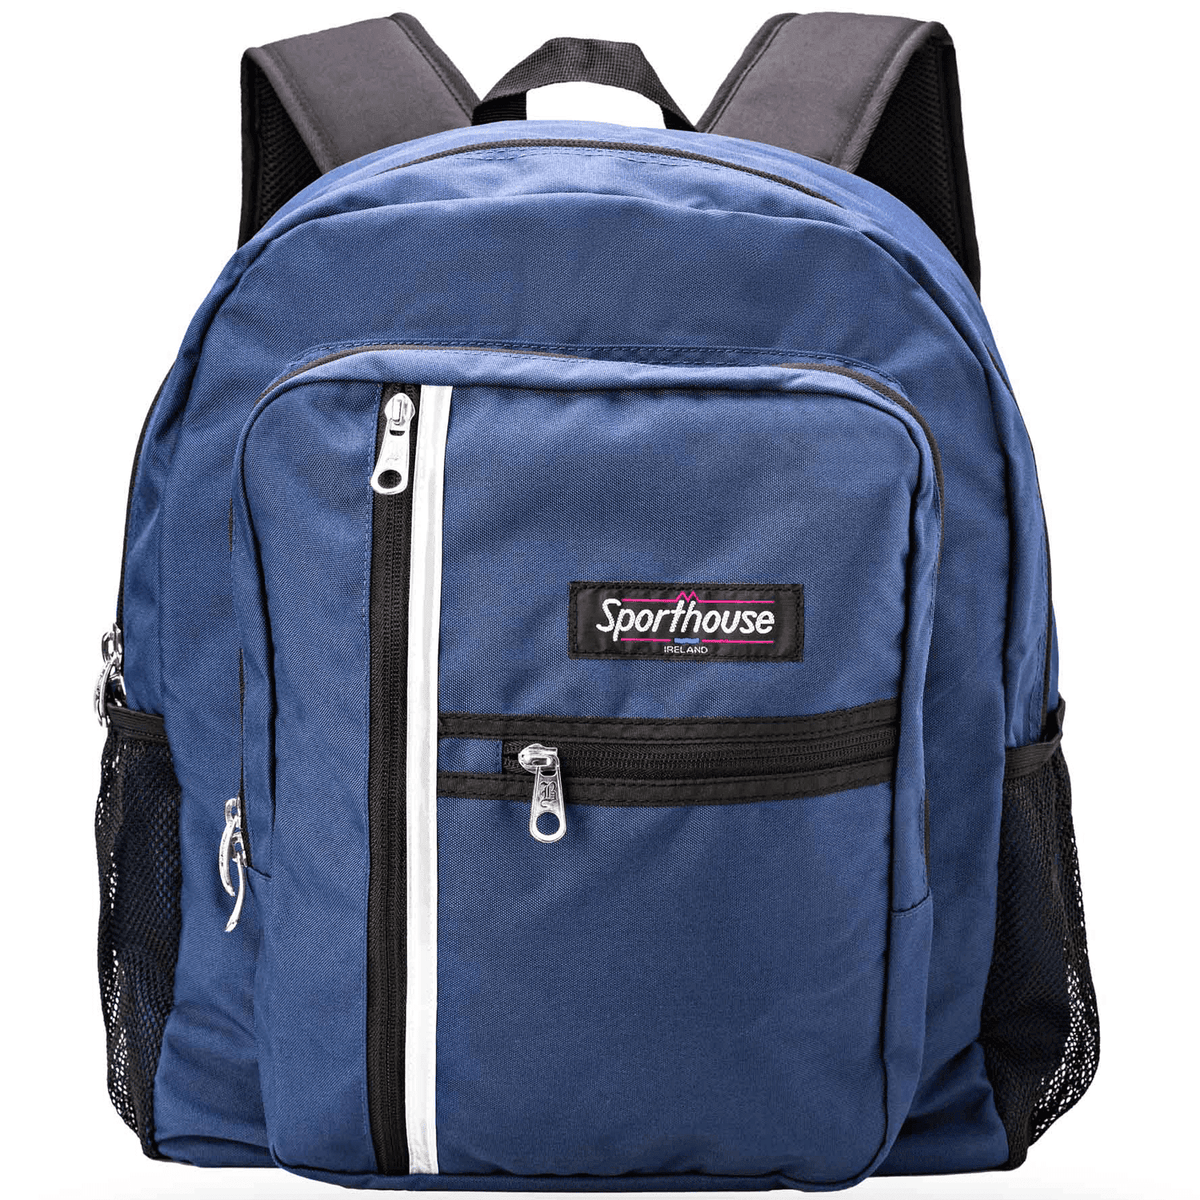 Student 2000 42L Backpack - Navy